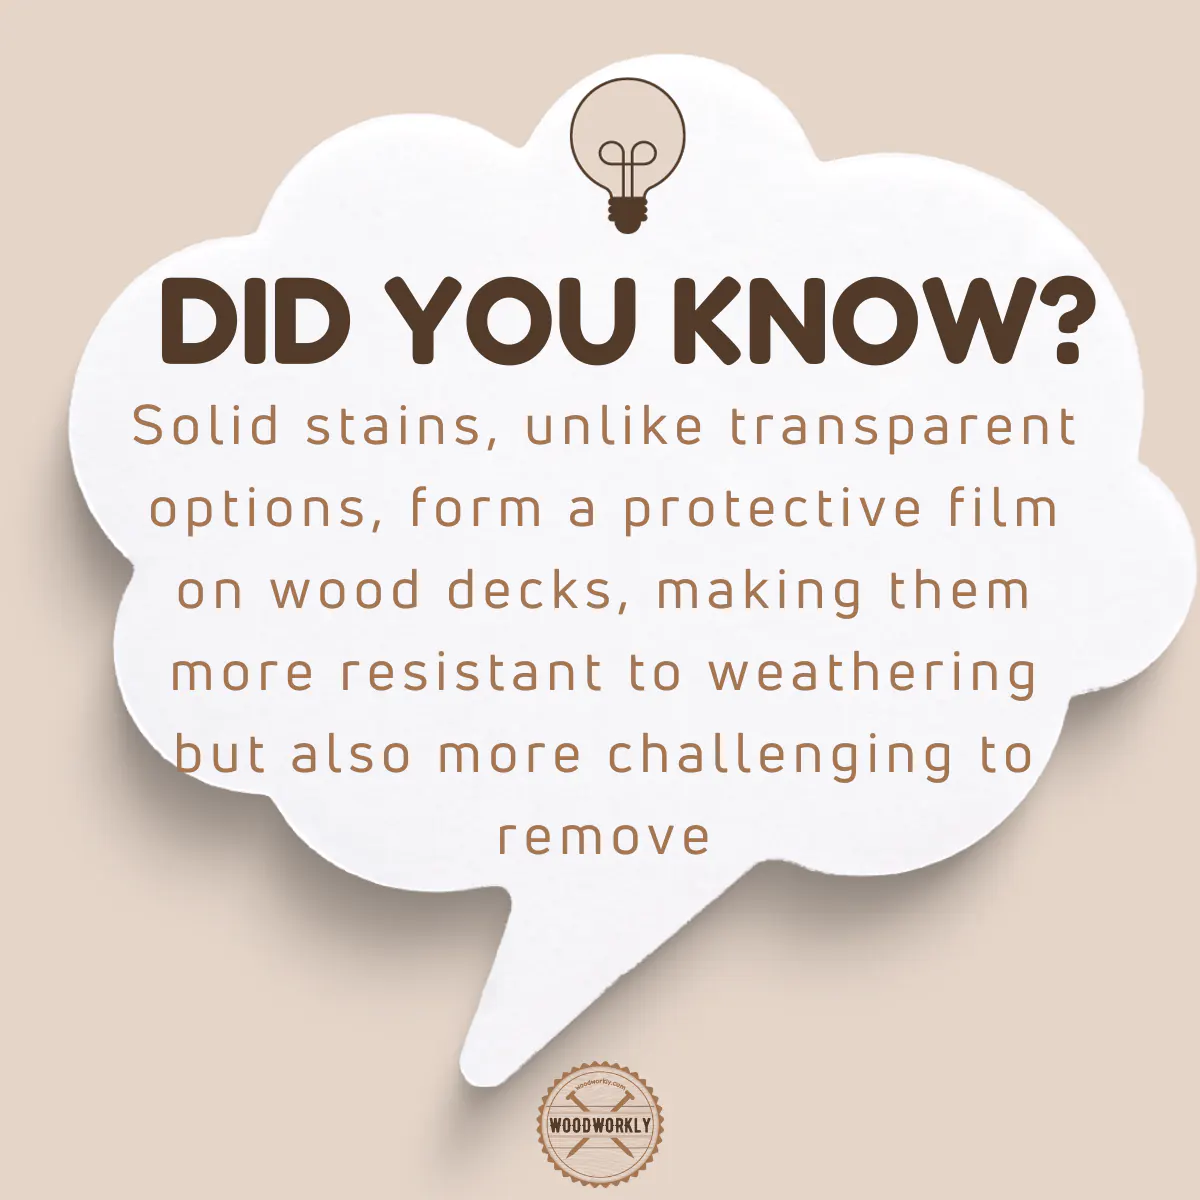 Did you know fact about solid stains on wood decks